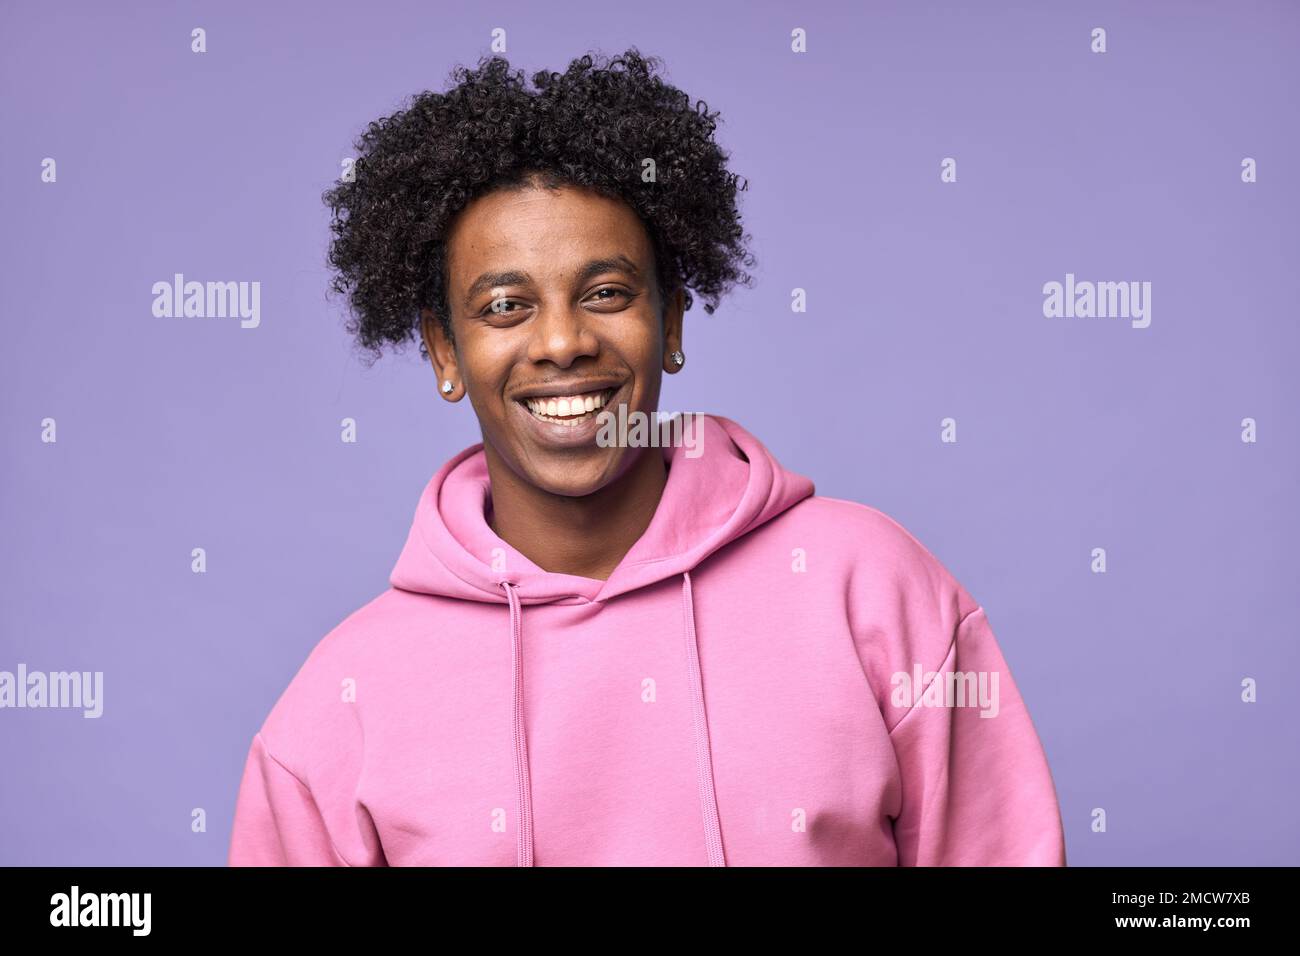 Young happy African American teen guy wearing pink hoodie isolated on purple. Stock Photo